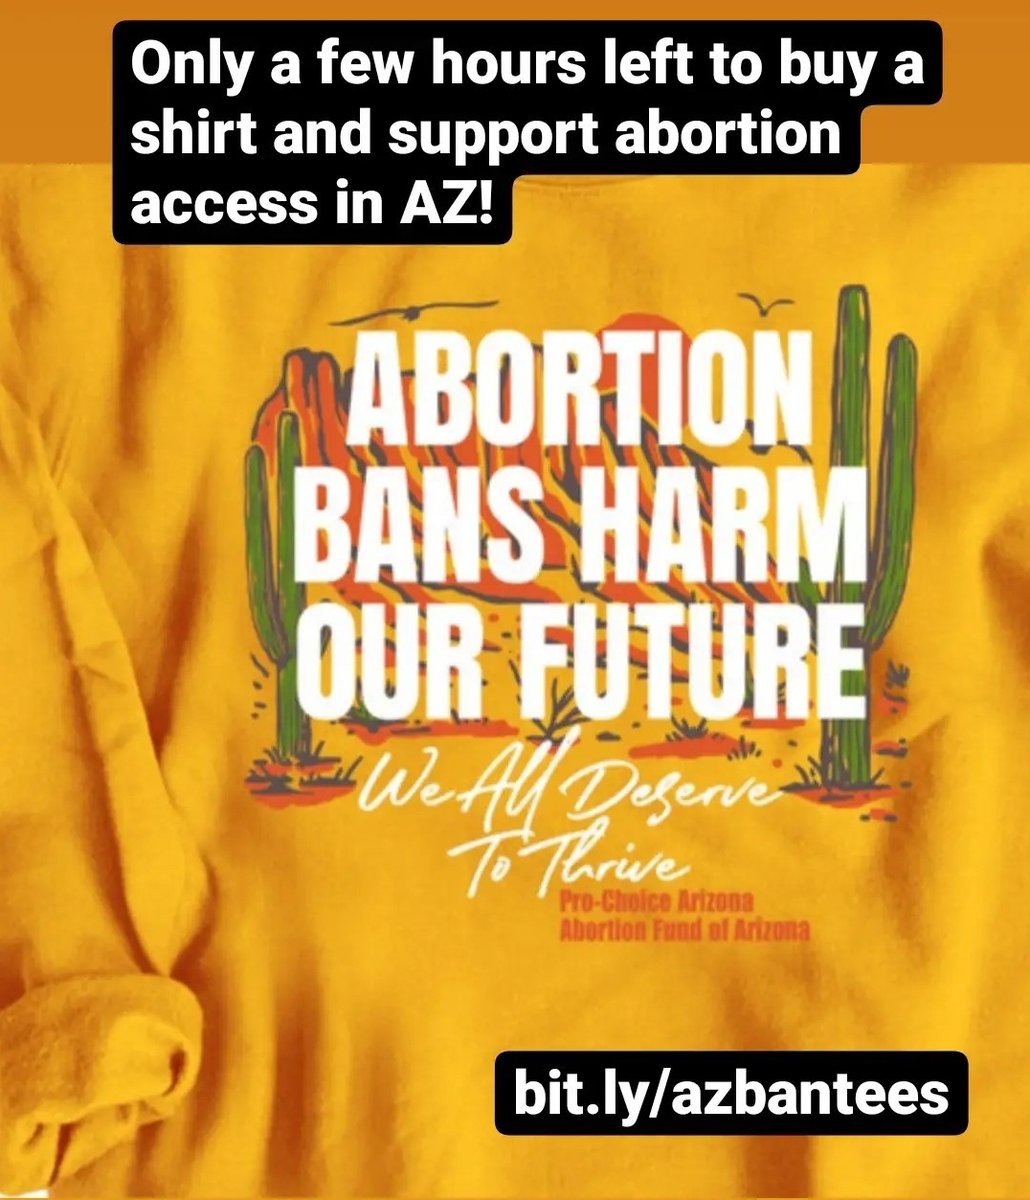 6 more hours left of our abortion ban fundraiser! SB 1457 - the genetic abnormality abortion ban - is set to take effect in AZ on Sept 29th #abortionbans #arizona bonfire.com/pro-choice-ari…